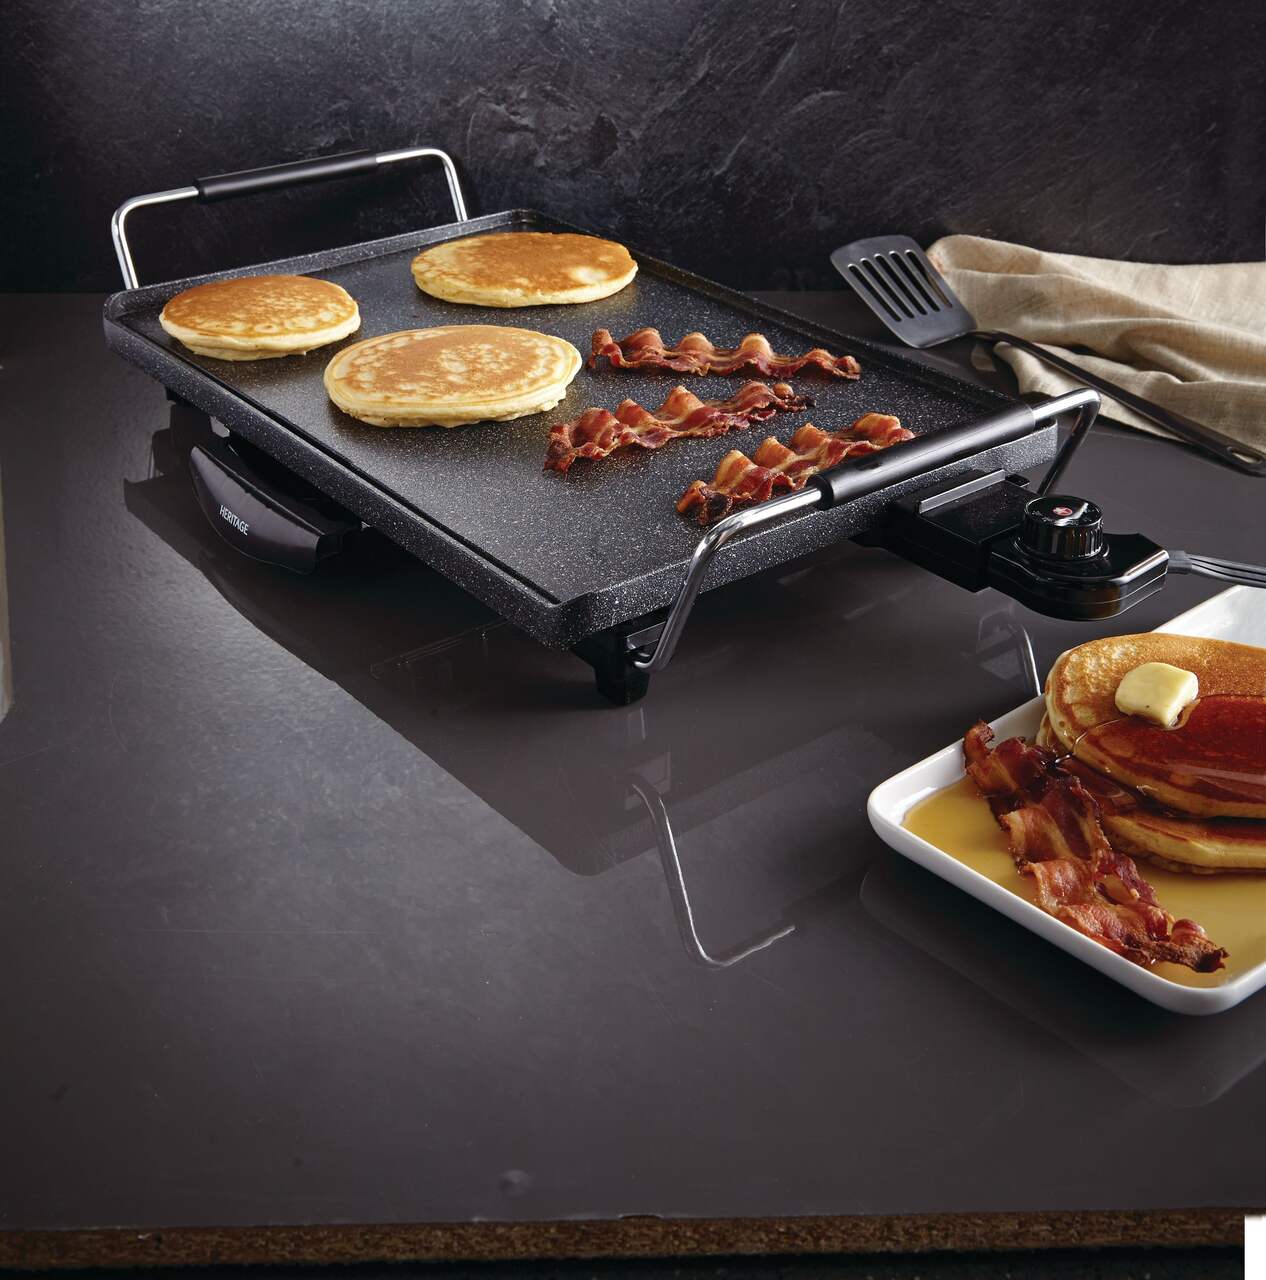 https://media-www.canadiantire.ca/product/living/kitchen/kitchen-appliances/0431340/heritage-rock-electric-griddle-f841bb71-fe87-42ca-b110-1abe75267d90-jpgrendition.jpg?imdensity=1&imwidth=1244&impolicy=mZoom